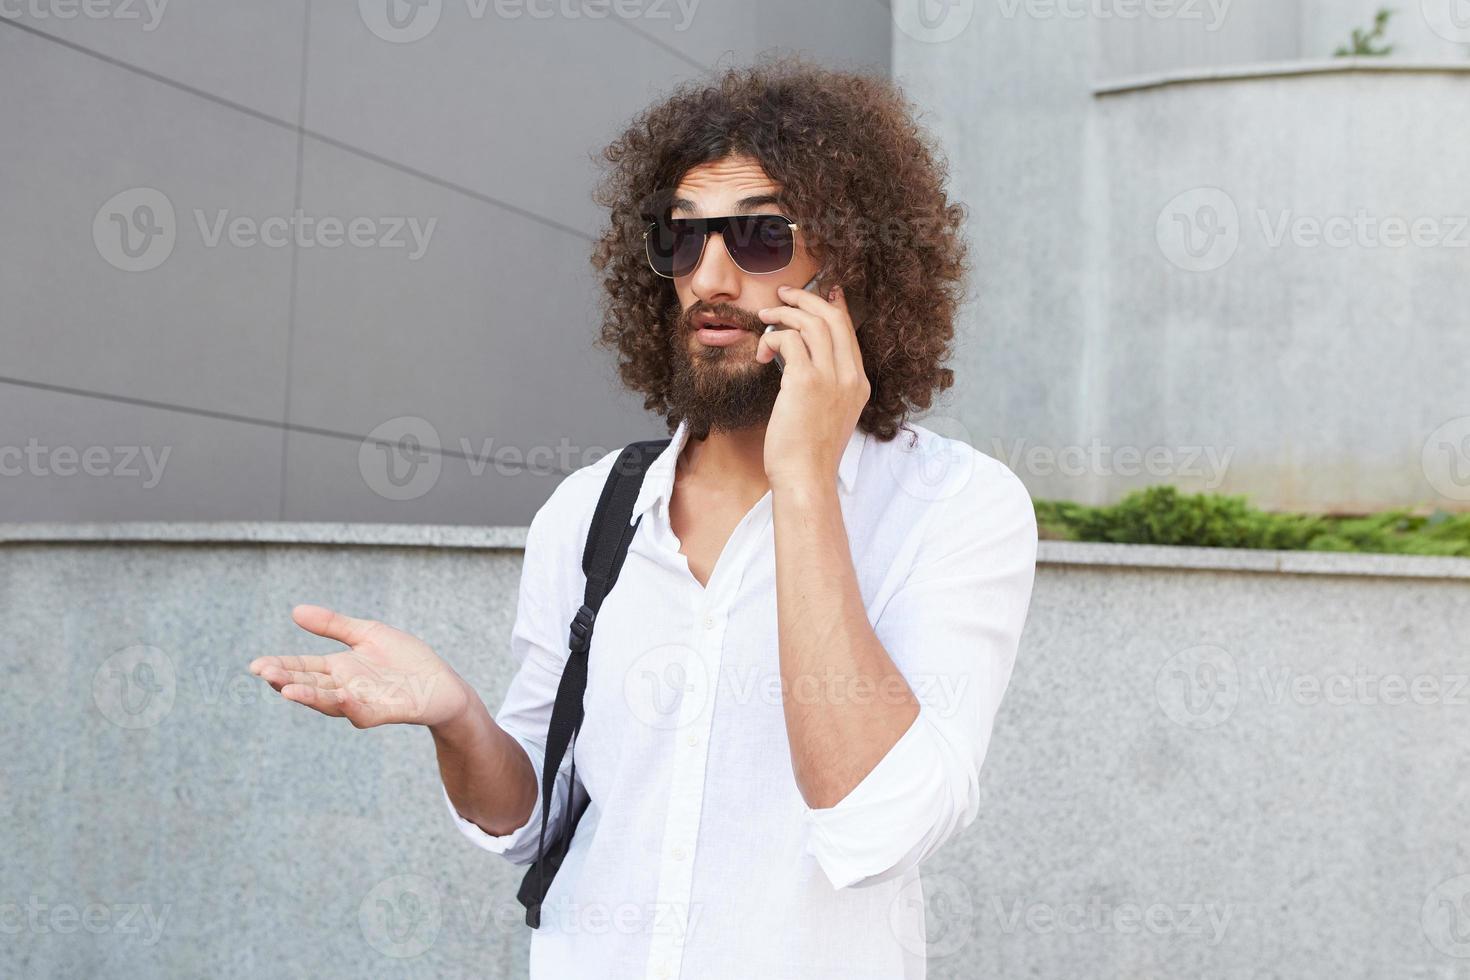 Wonders trucked young bearded man standing over outdoor background, raising his palm and wrinkling forehead, wearing glasses and white shirt photo